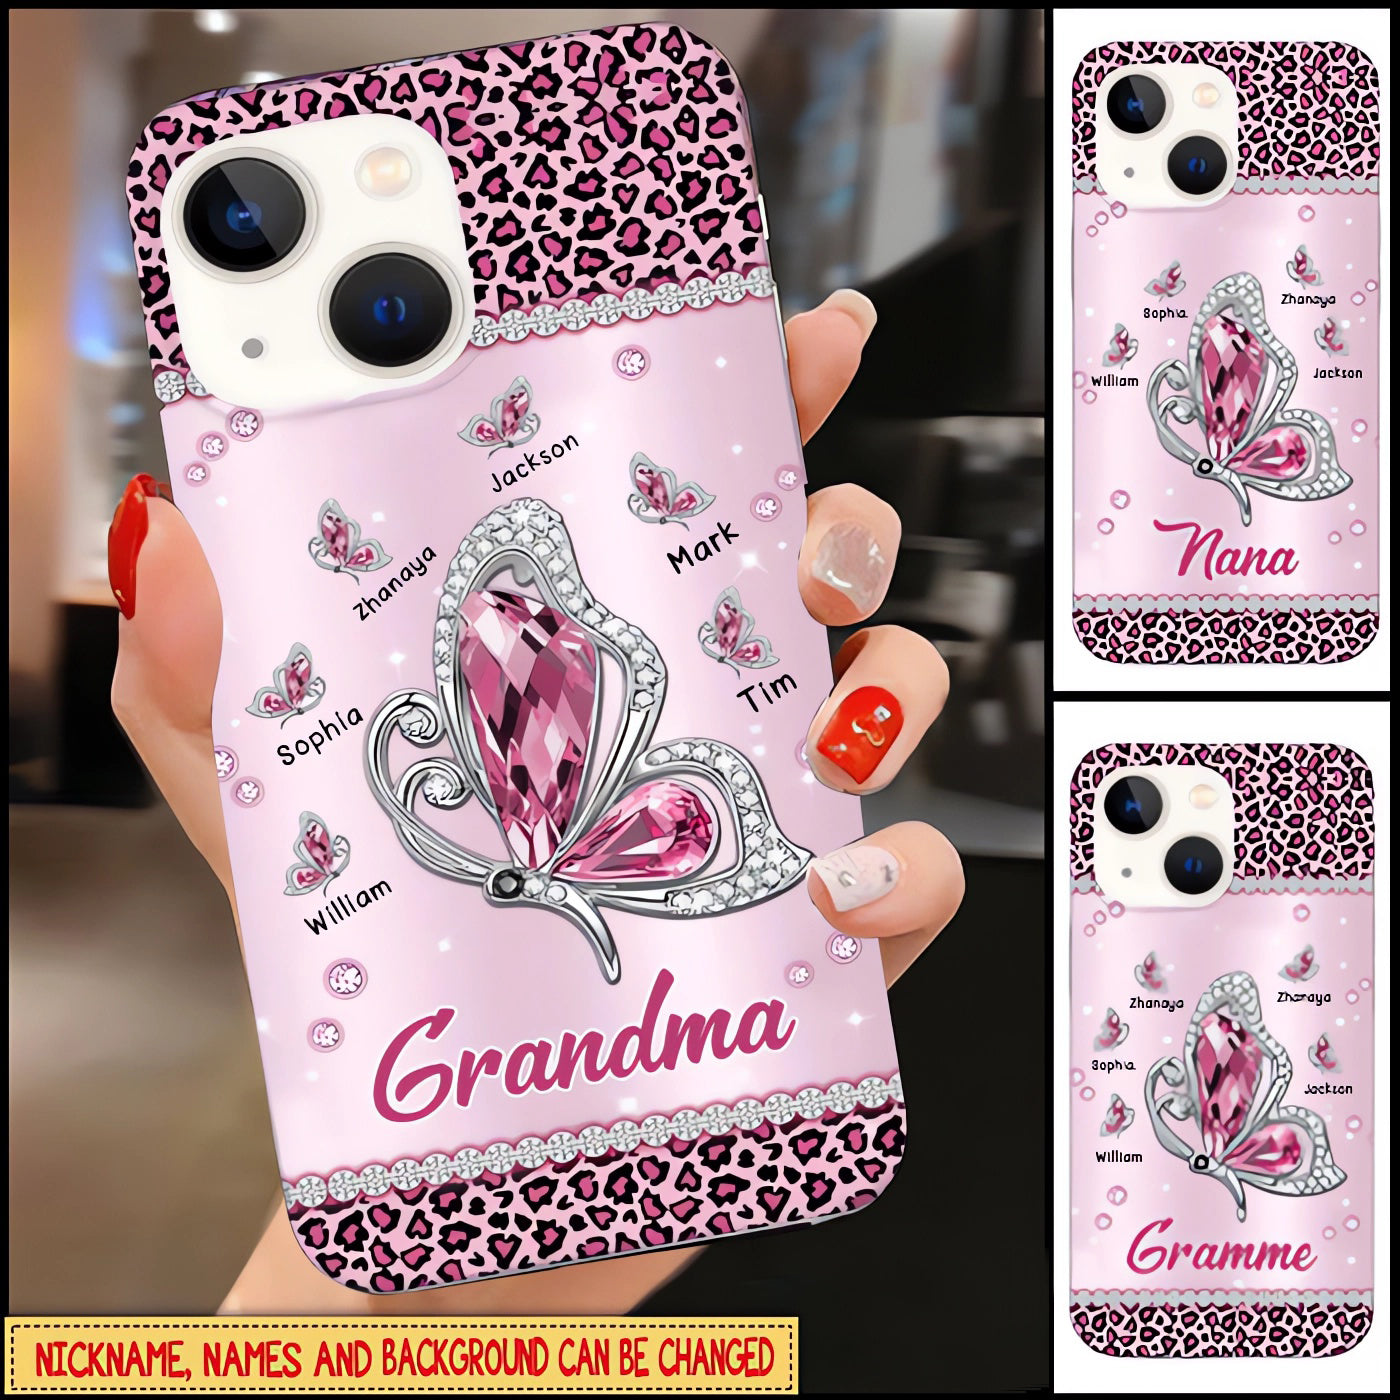 Sparkling Pink Violet Butterfly Grandma- Mom With Little Kids Personalized Glass Phone Case